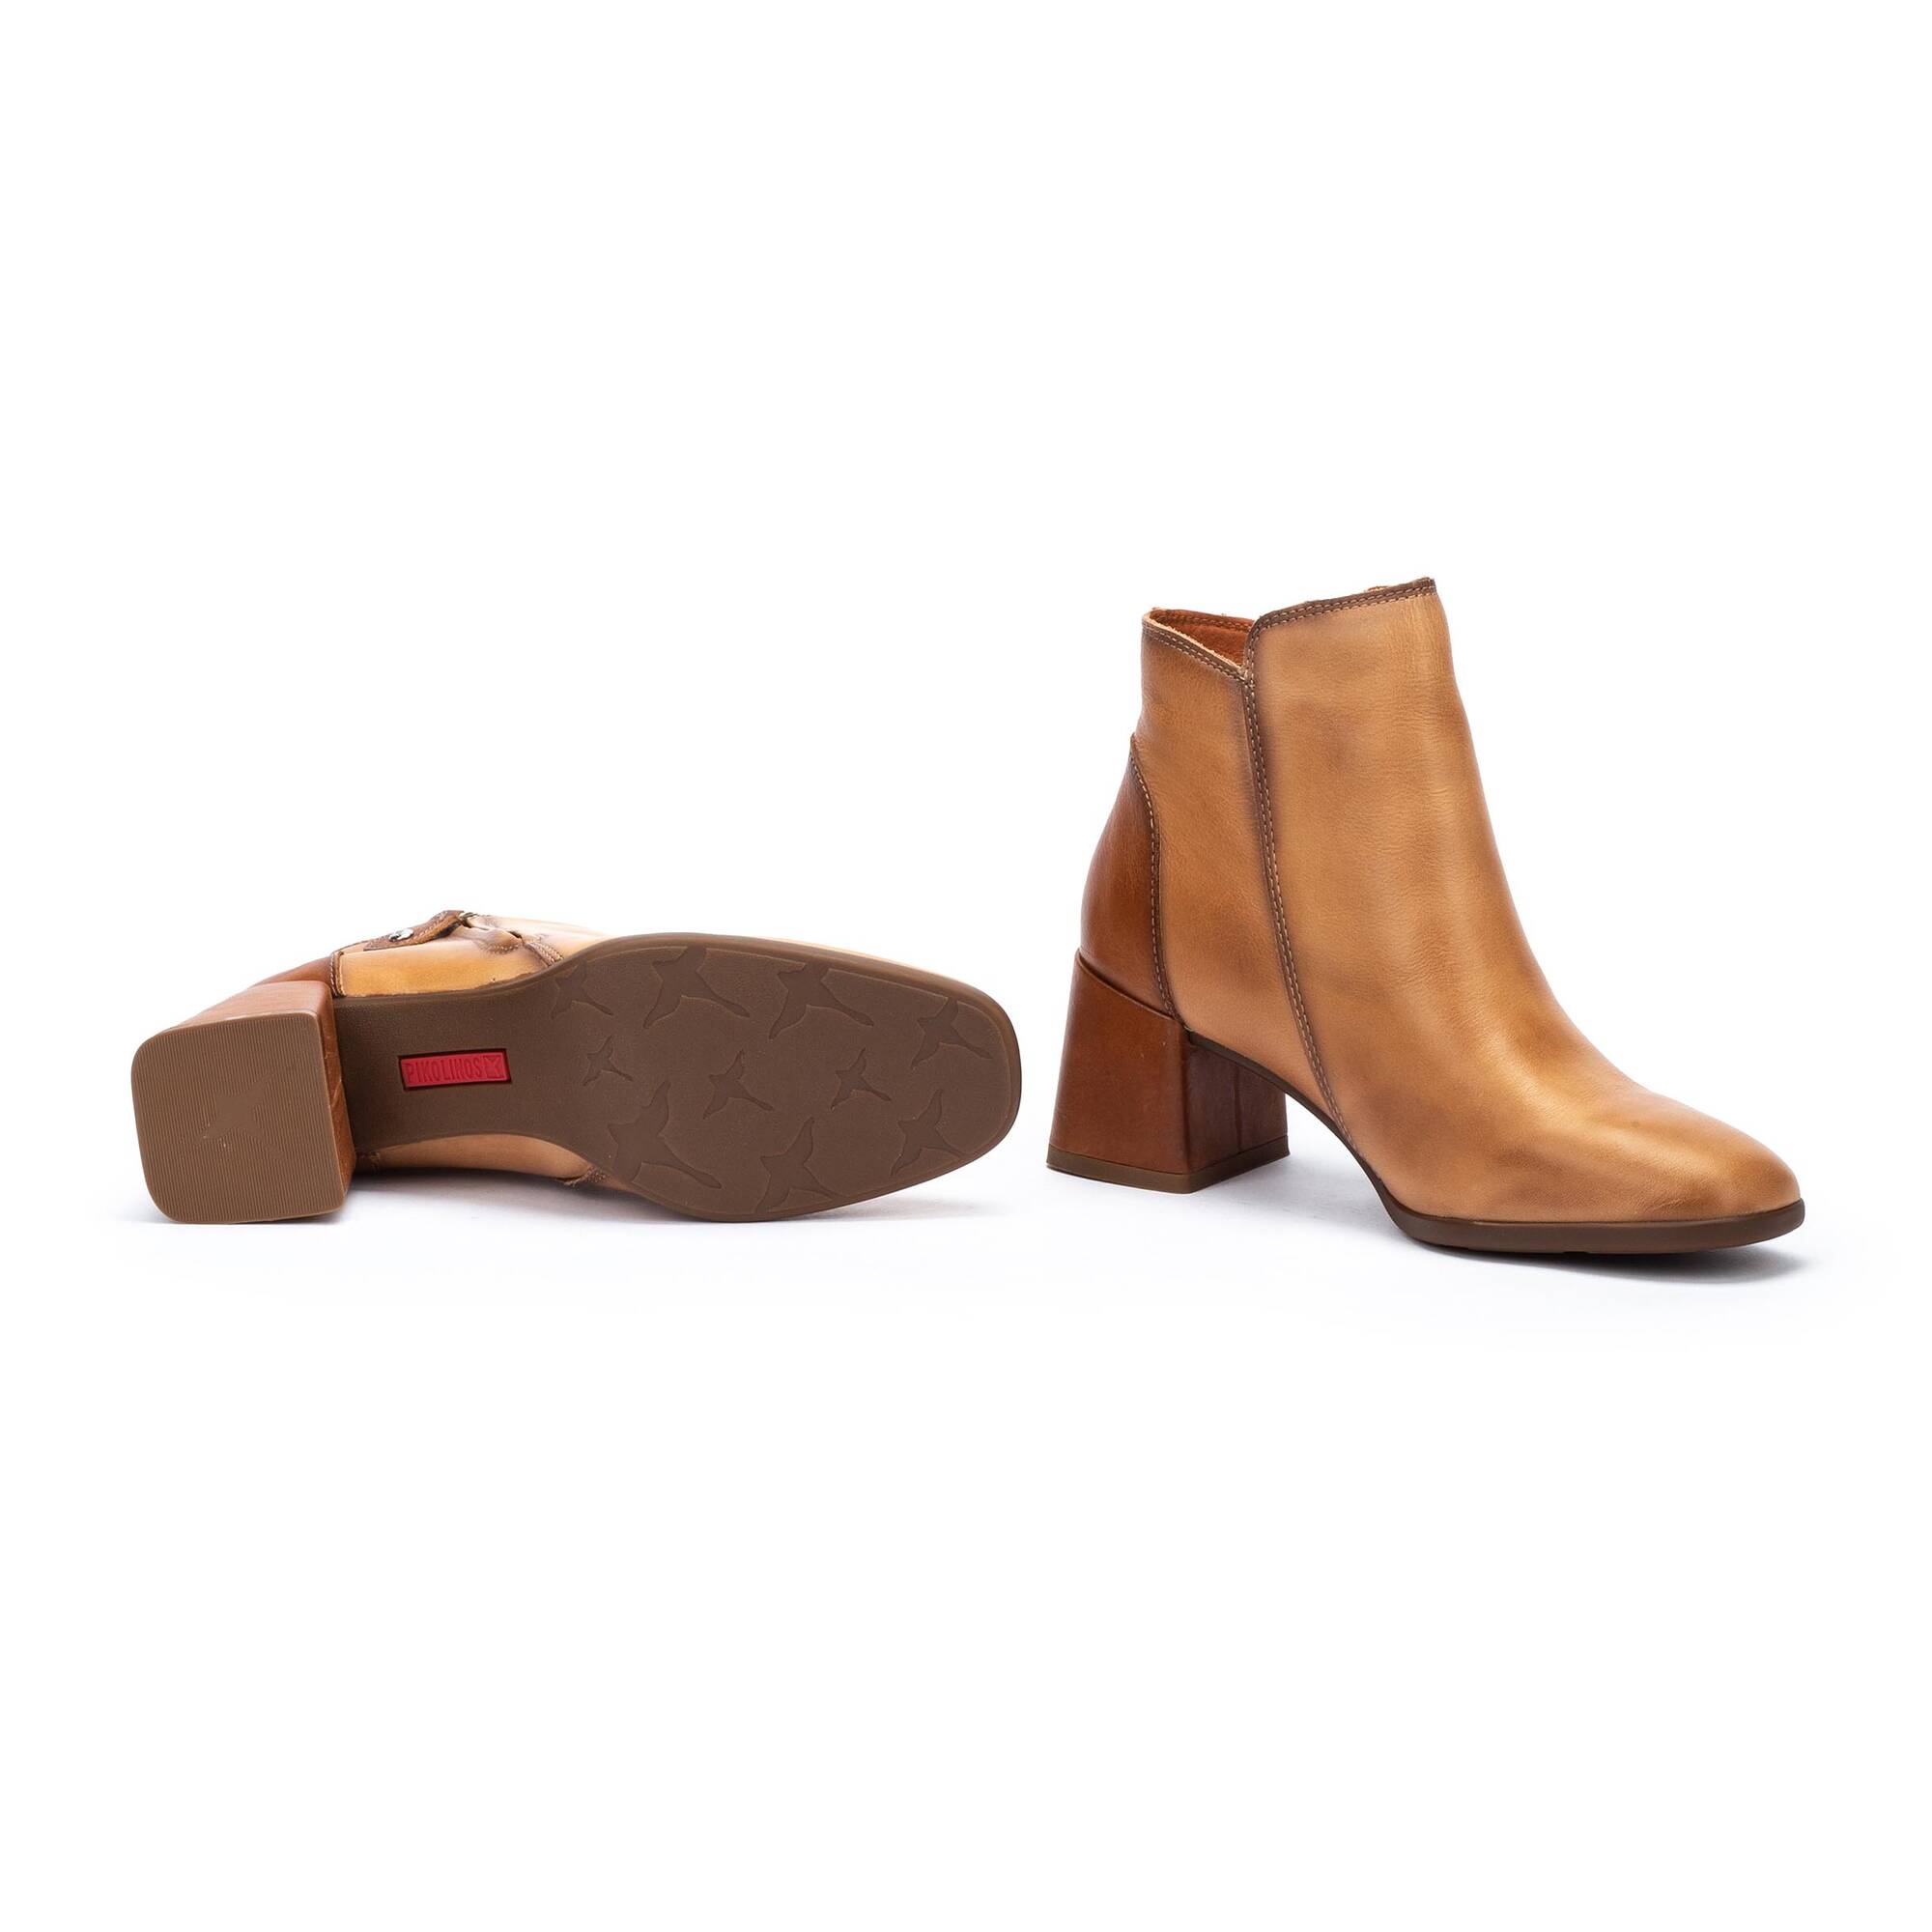 Ankle boots | SEVILLA W1W-8816C1, ALMOND, large image number 70 | null